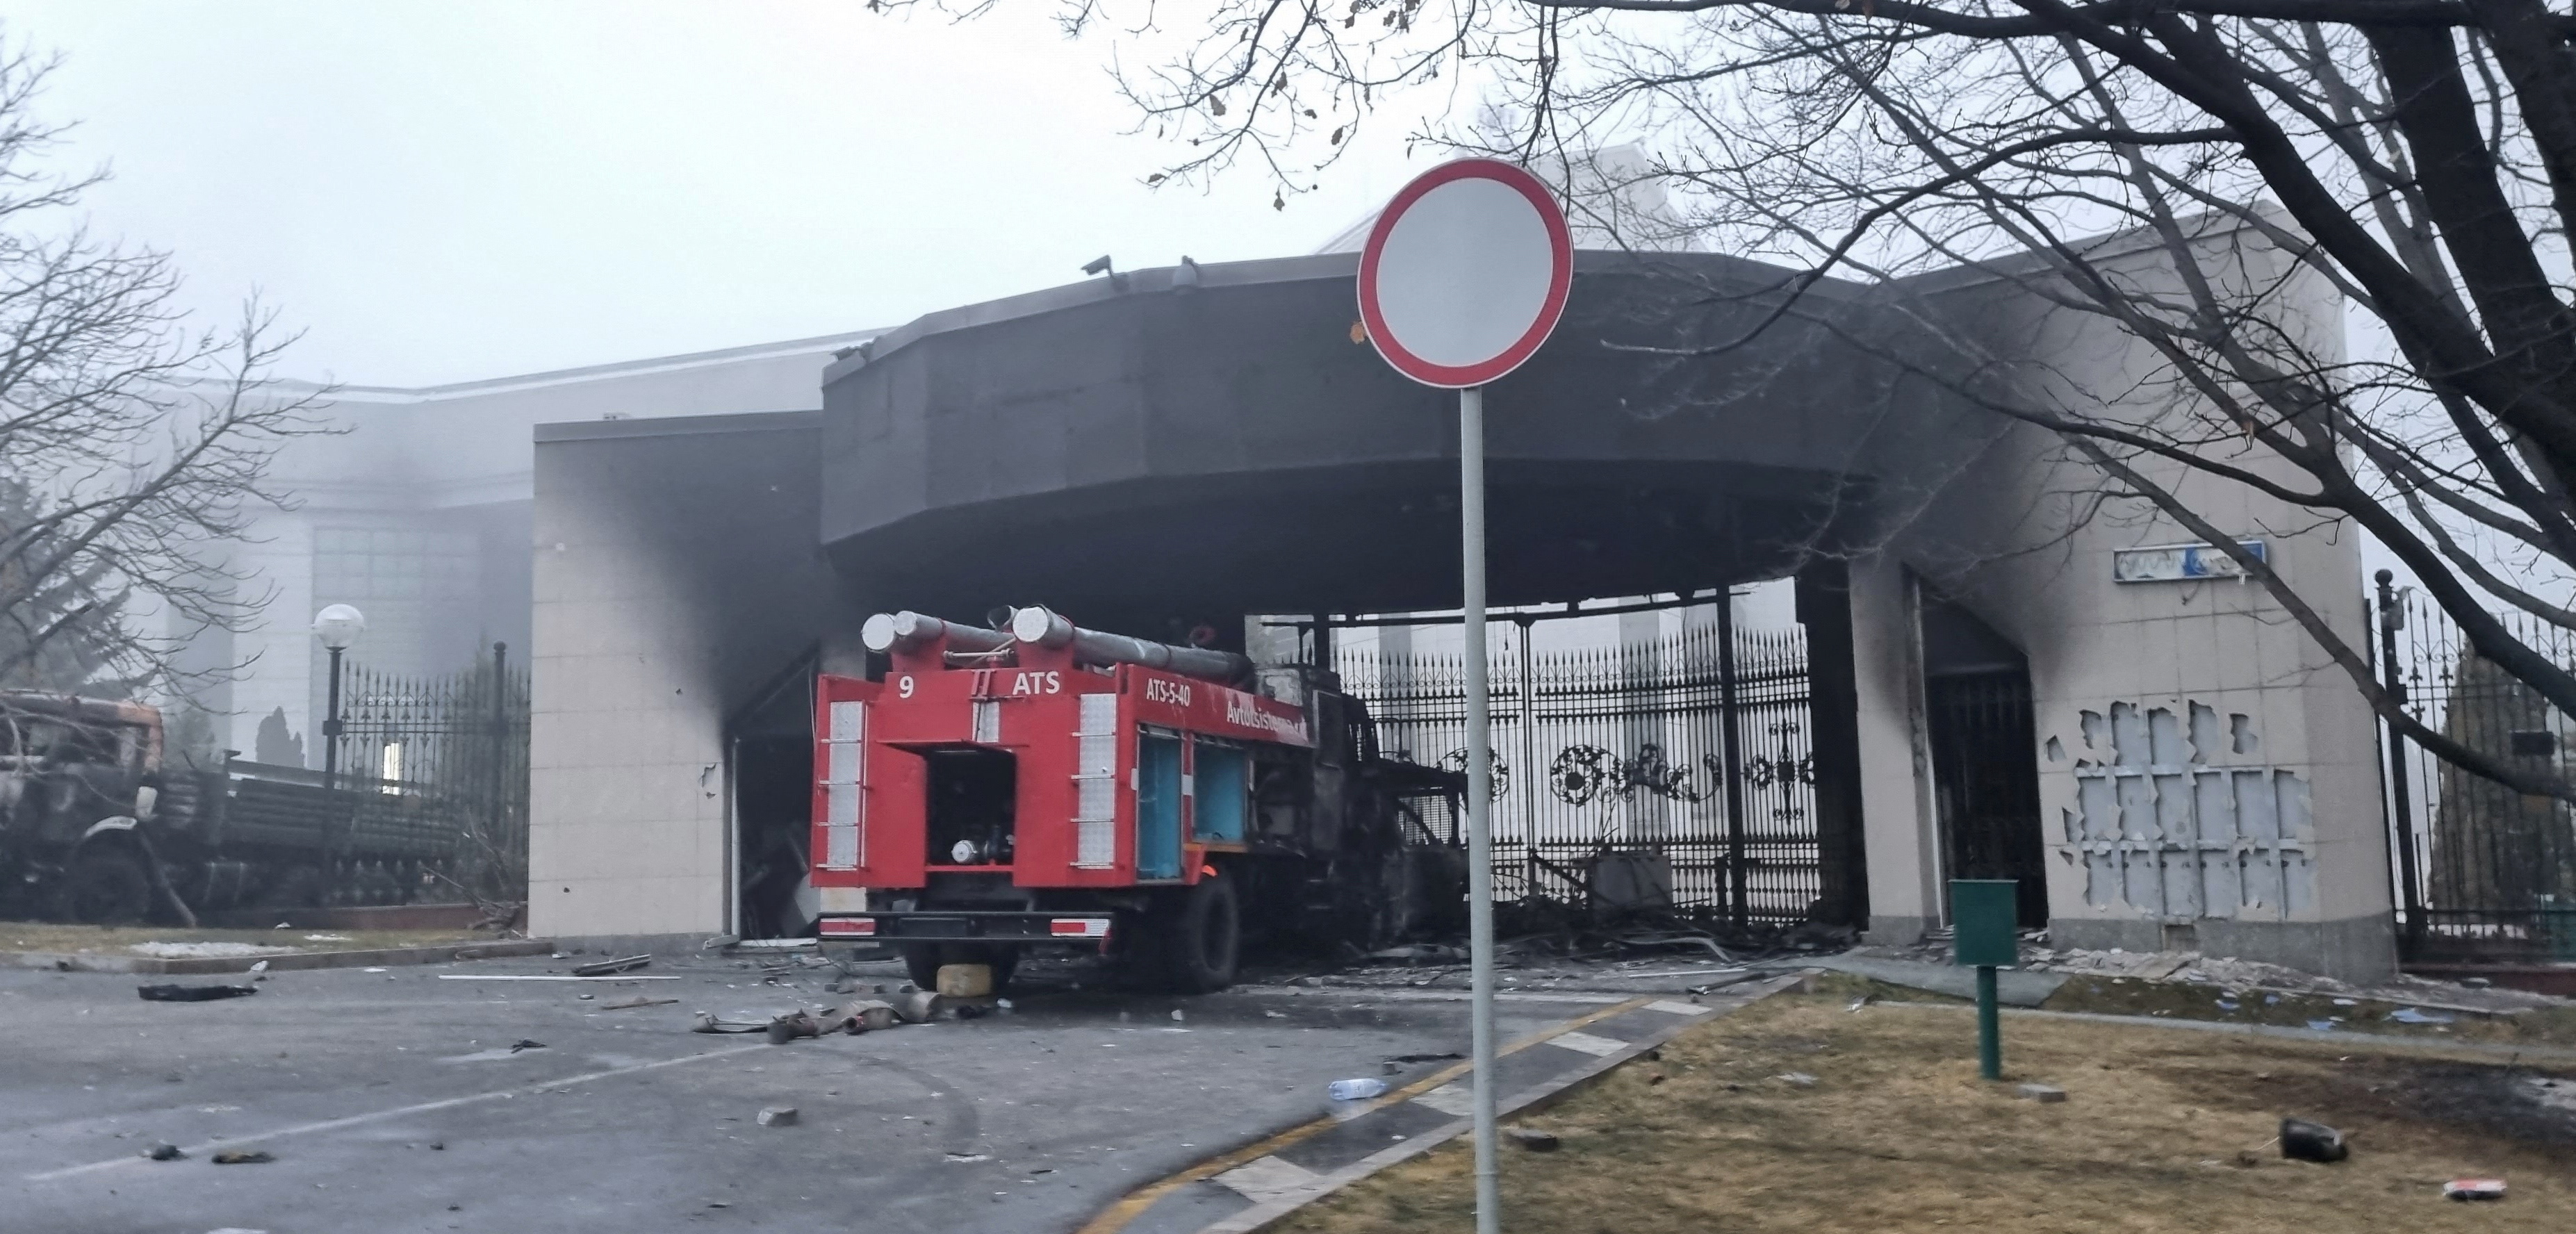 A burned fire truck is seen in front of the Presidential Residence in Almaty